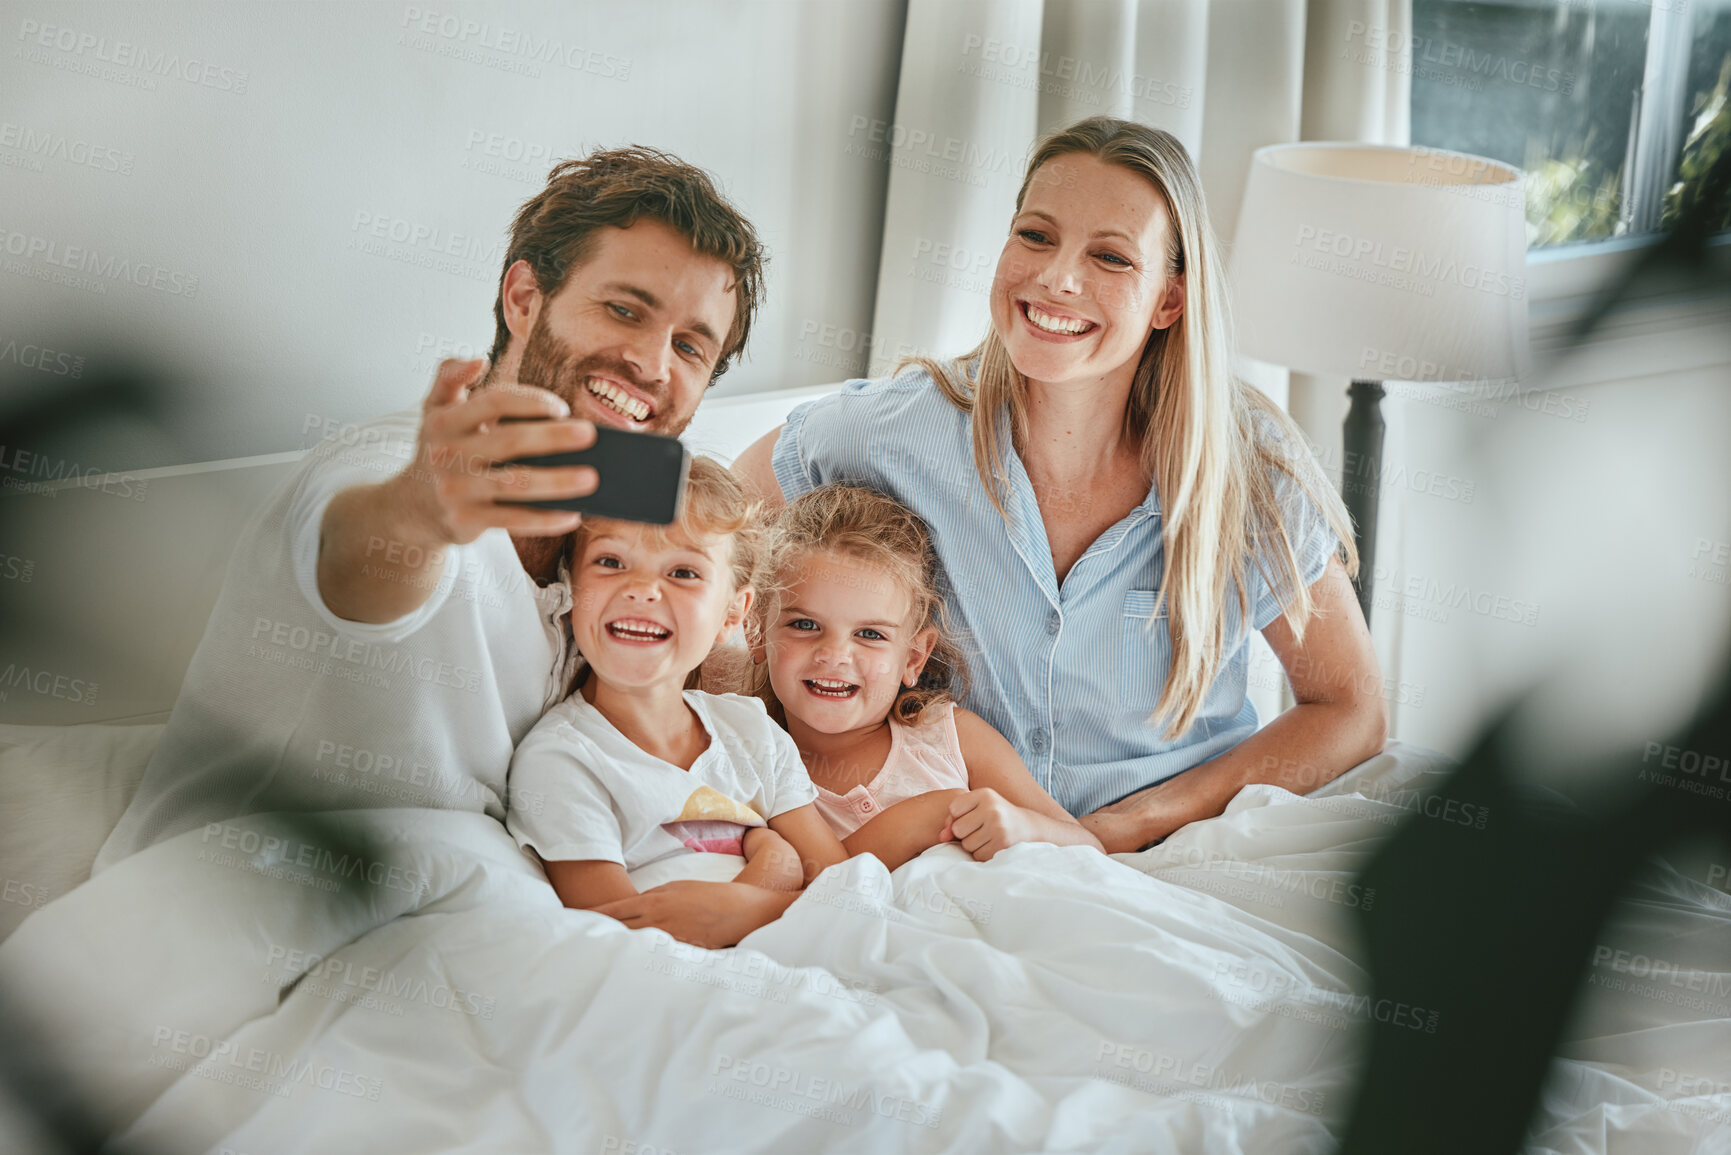 Buy stock photo Morning, bed and happy family take a selfie with a smile enjoying quality time, bonding and relaxing at home. Pictures, mother and father with young children, kids or siblings in the house bedroom